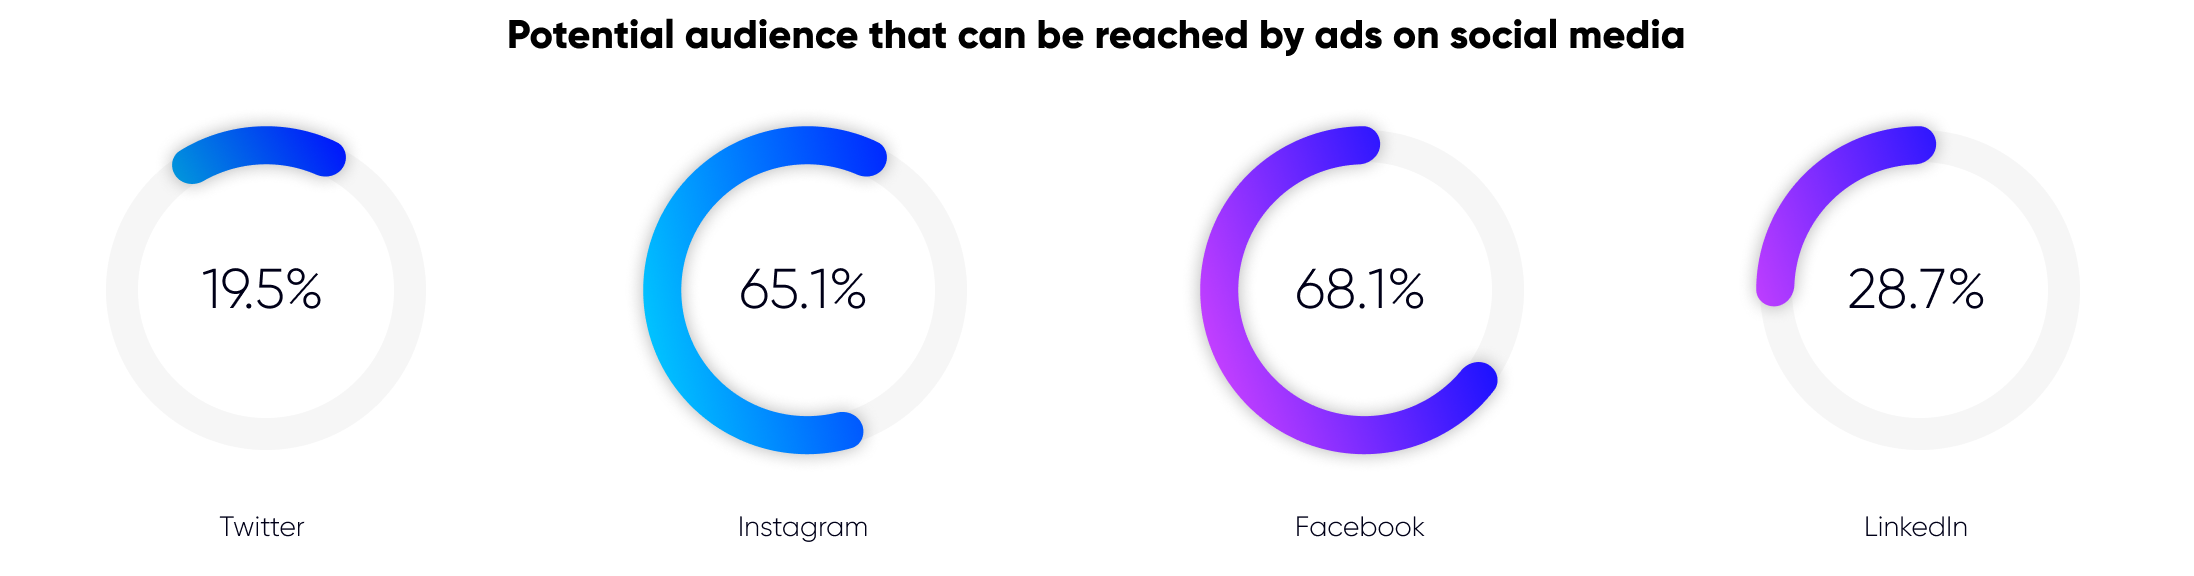 Potential audience that can be reach by ads on social media in Cyprus